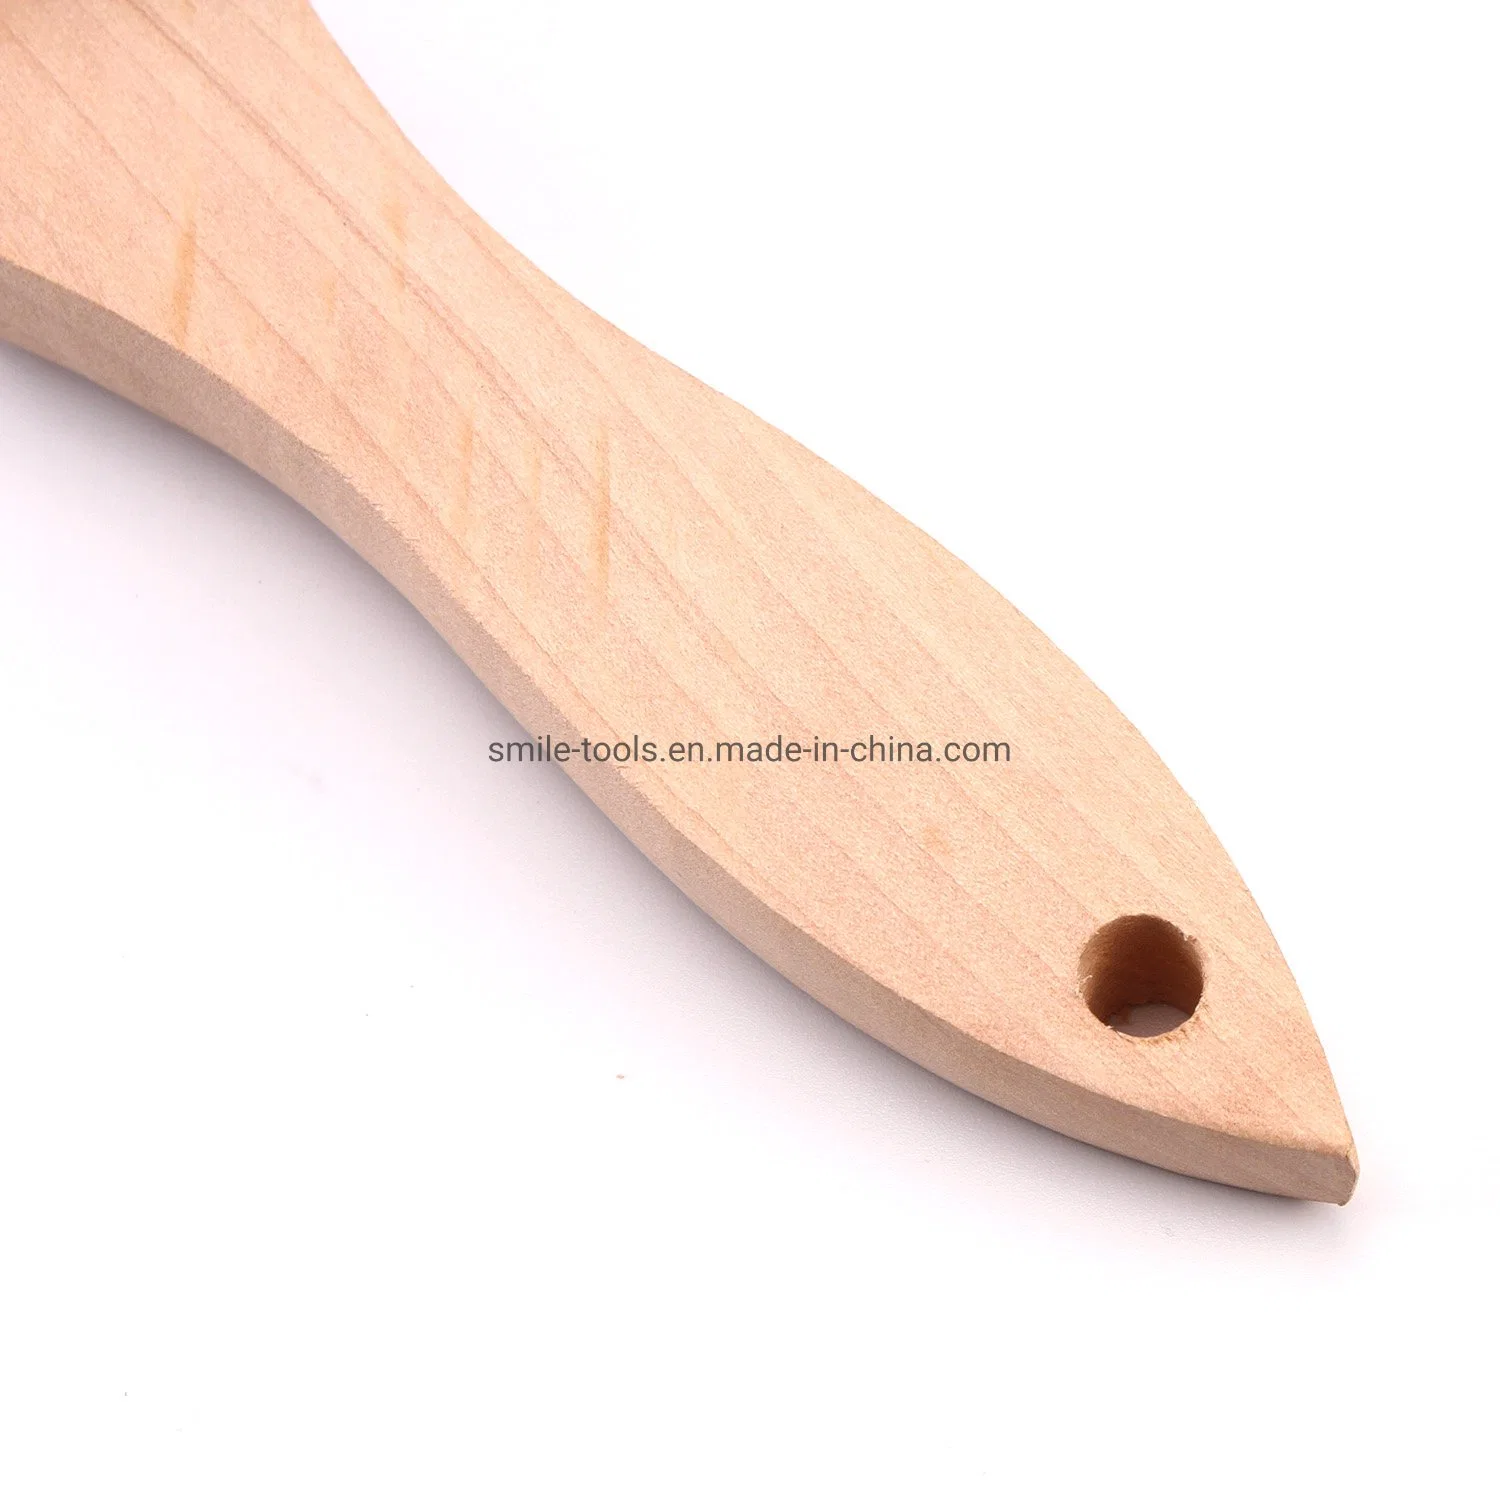 Decoration Construction Steel Wire Brush with Wooden Handle